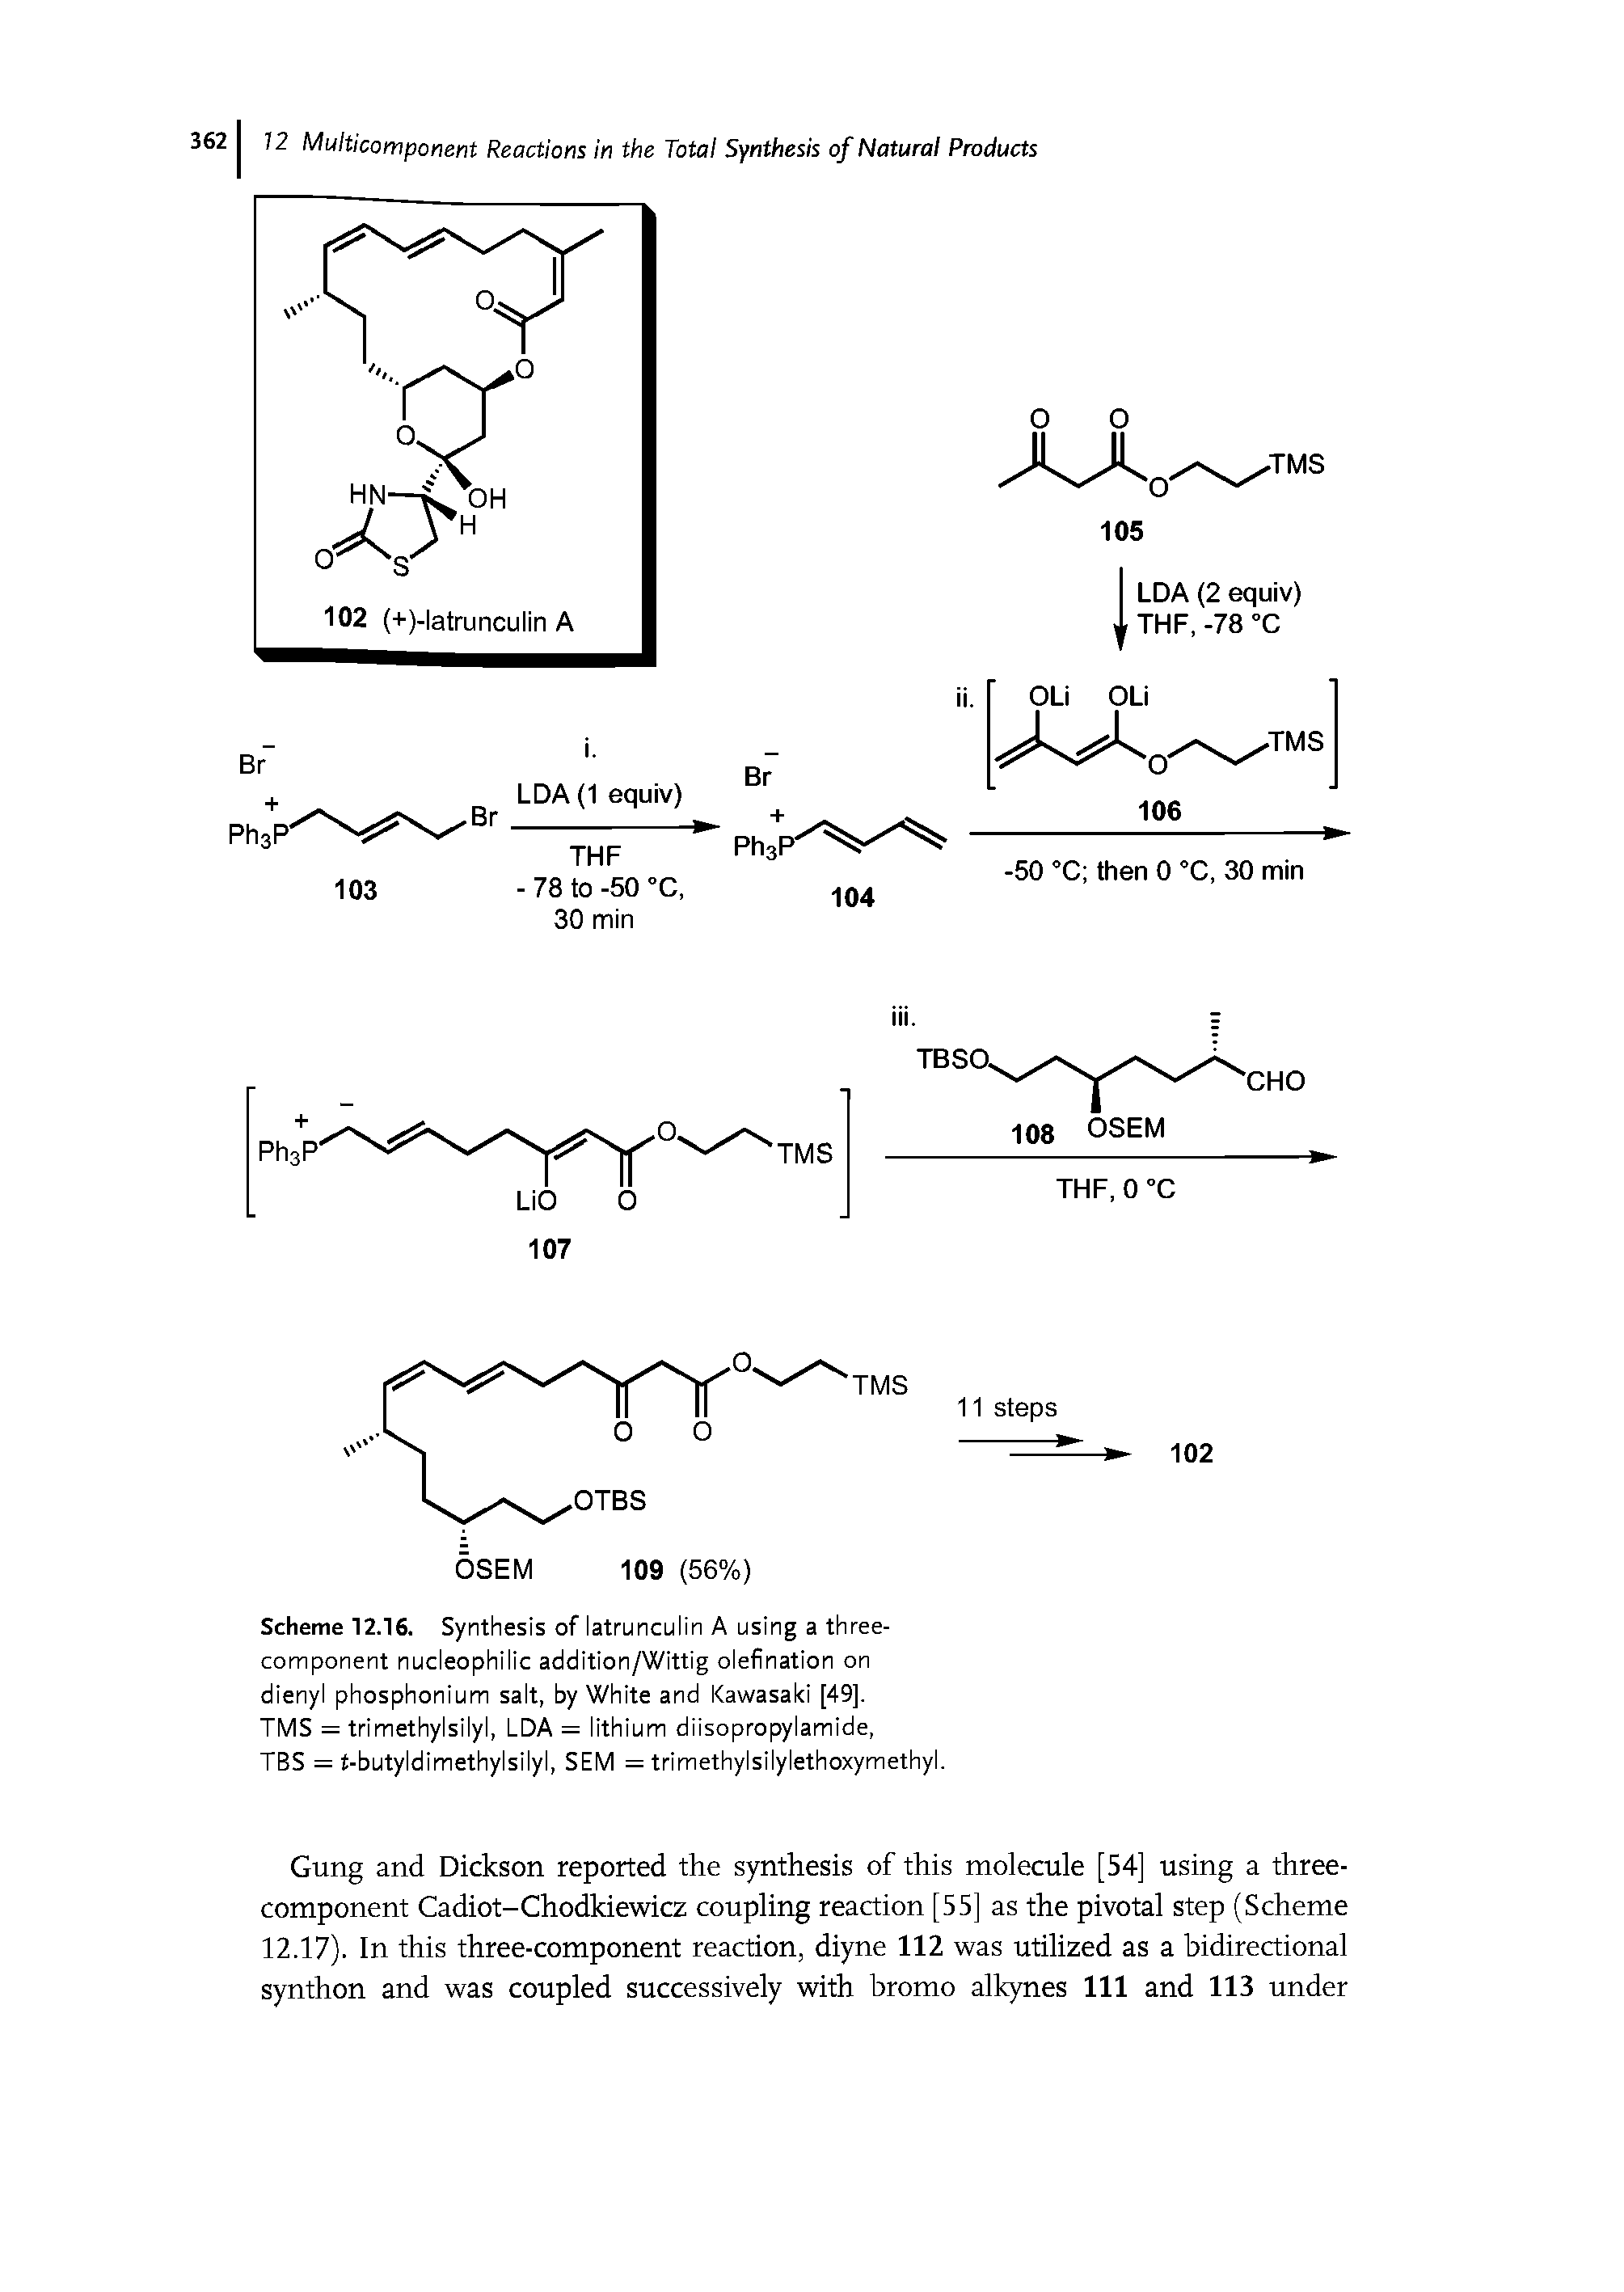 Scheme 12.16. Synthesis of latrunculin A using a three-component nucleophilic addition/Wittig olefination on dienyl phosphonium salt, by White and Kawasaki [49],...